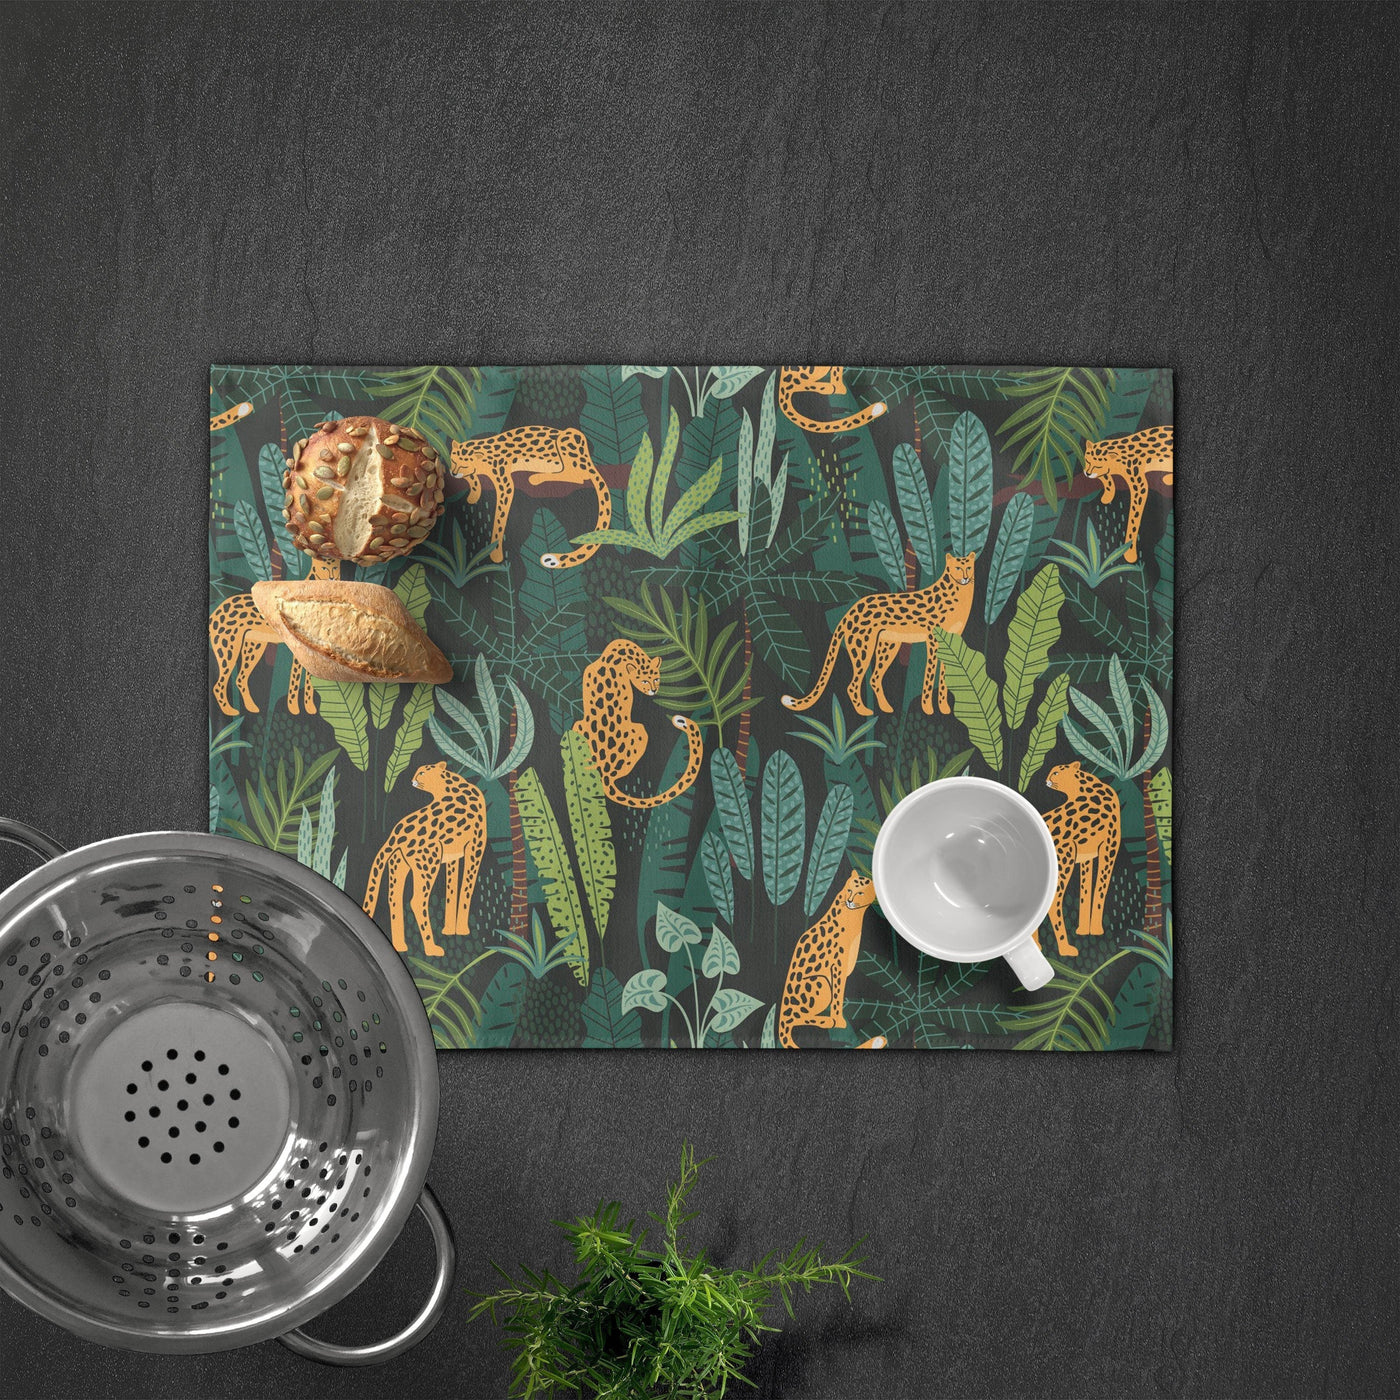 Placemat: Jungle Cheetah Placemat Sam + Zoey  Sam + Zoey